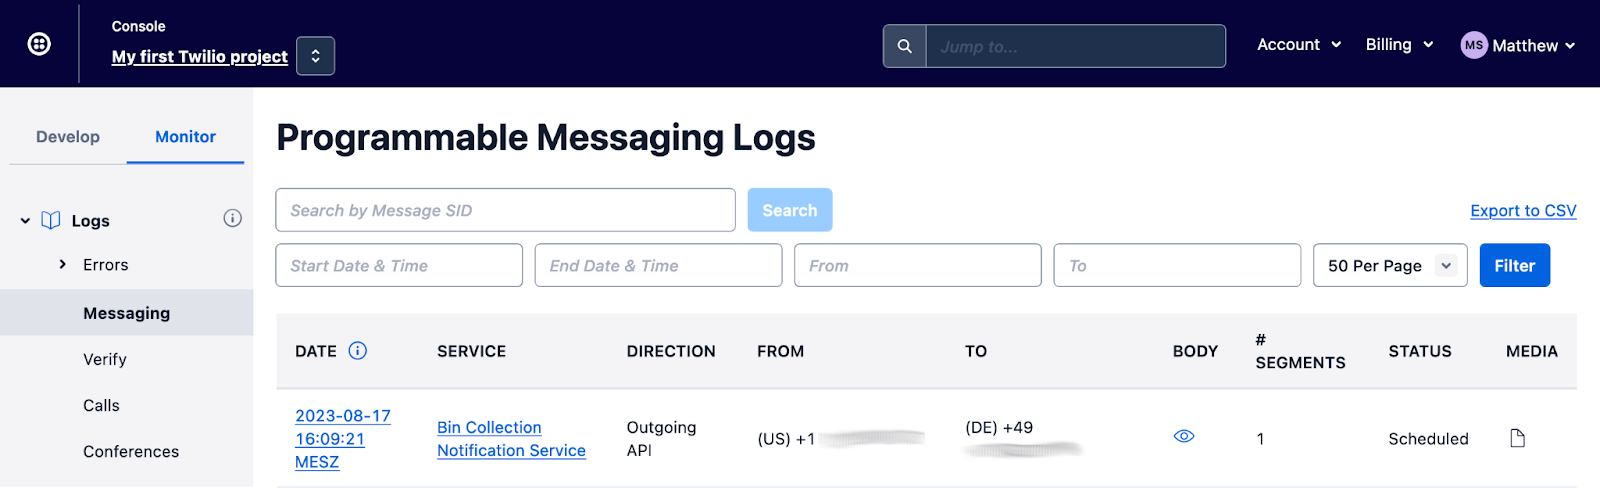 The Programmable Messaging Logs section of the Twilio Console.